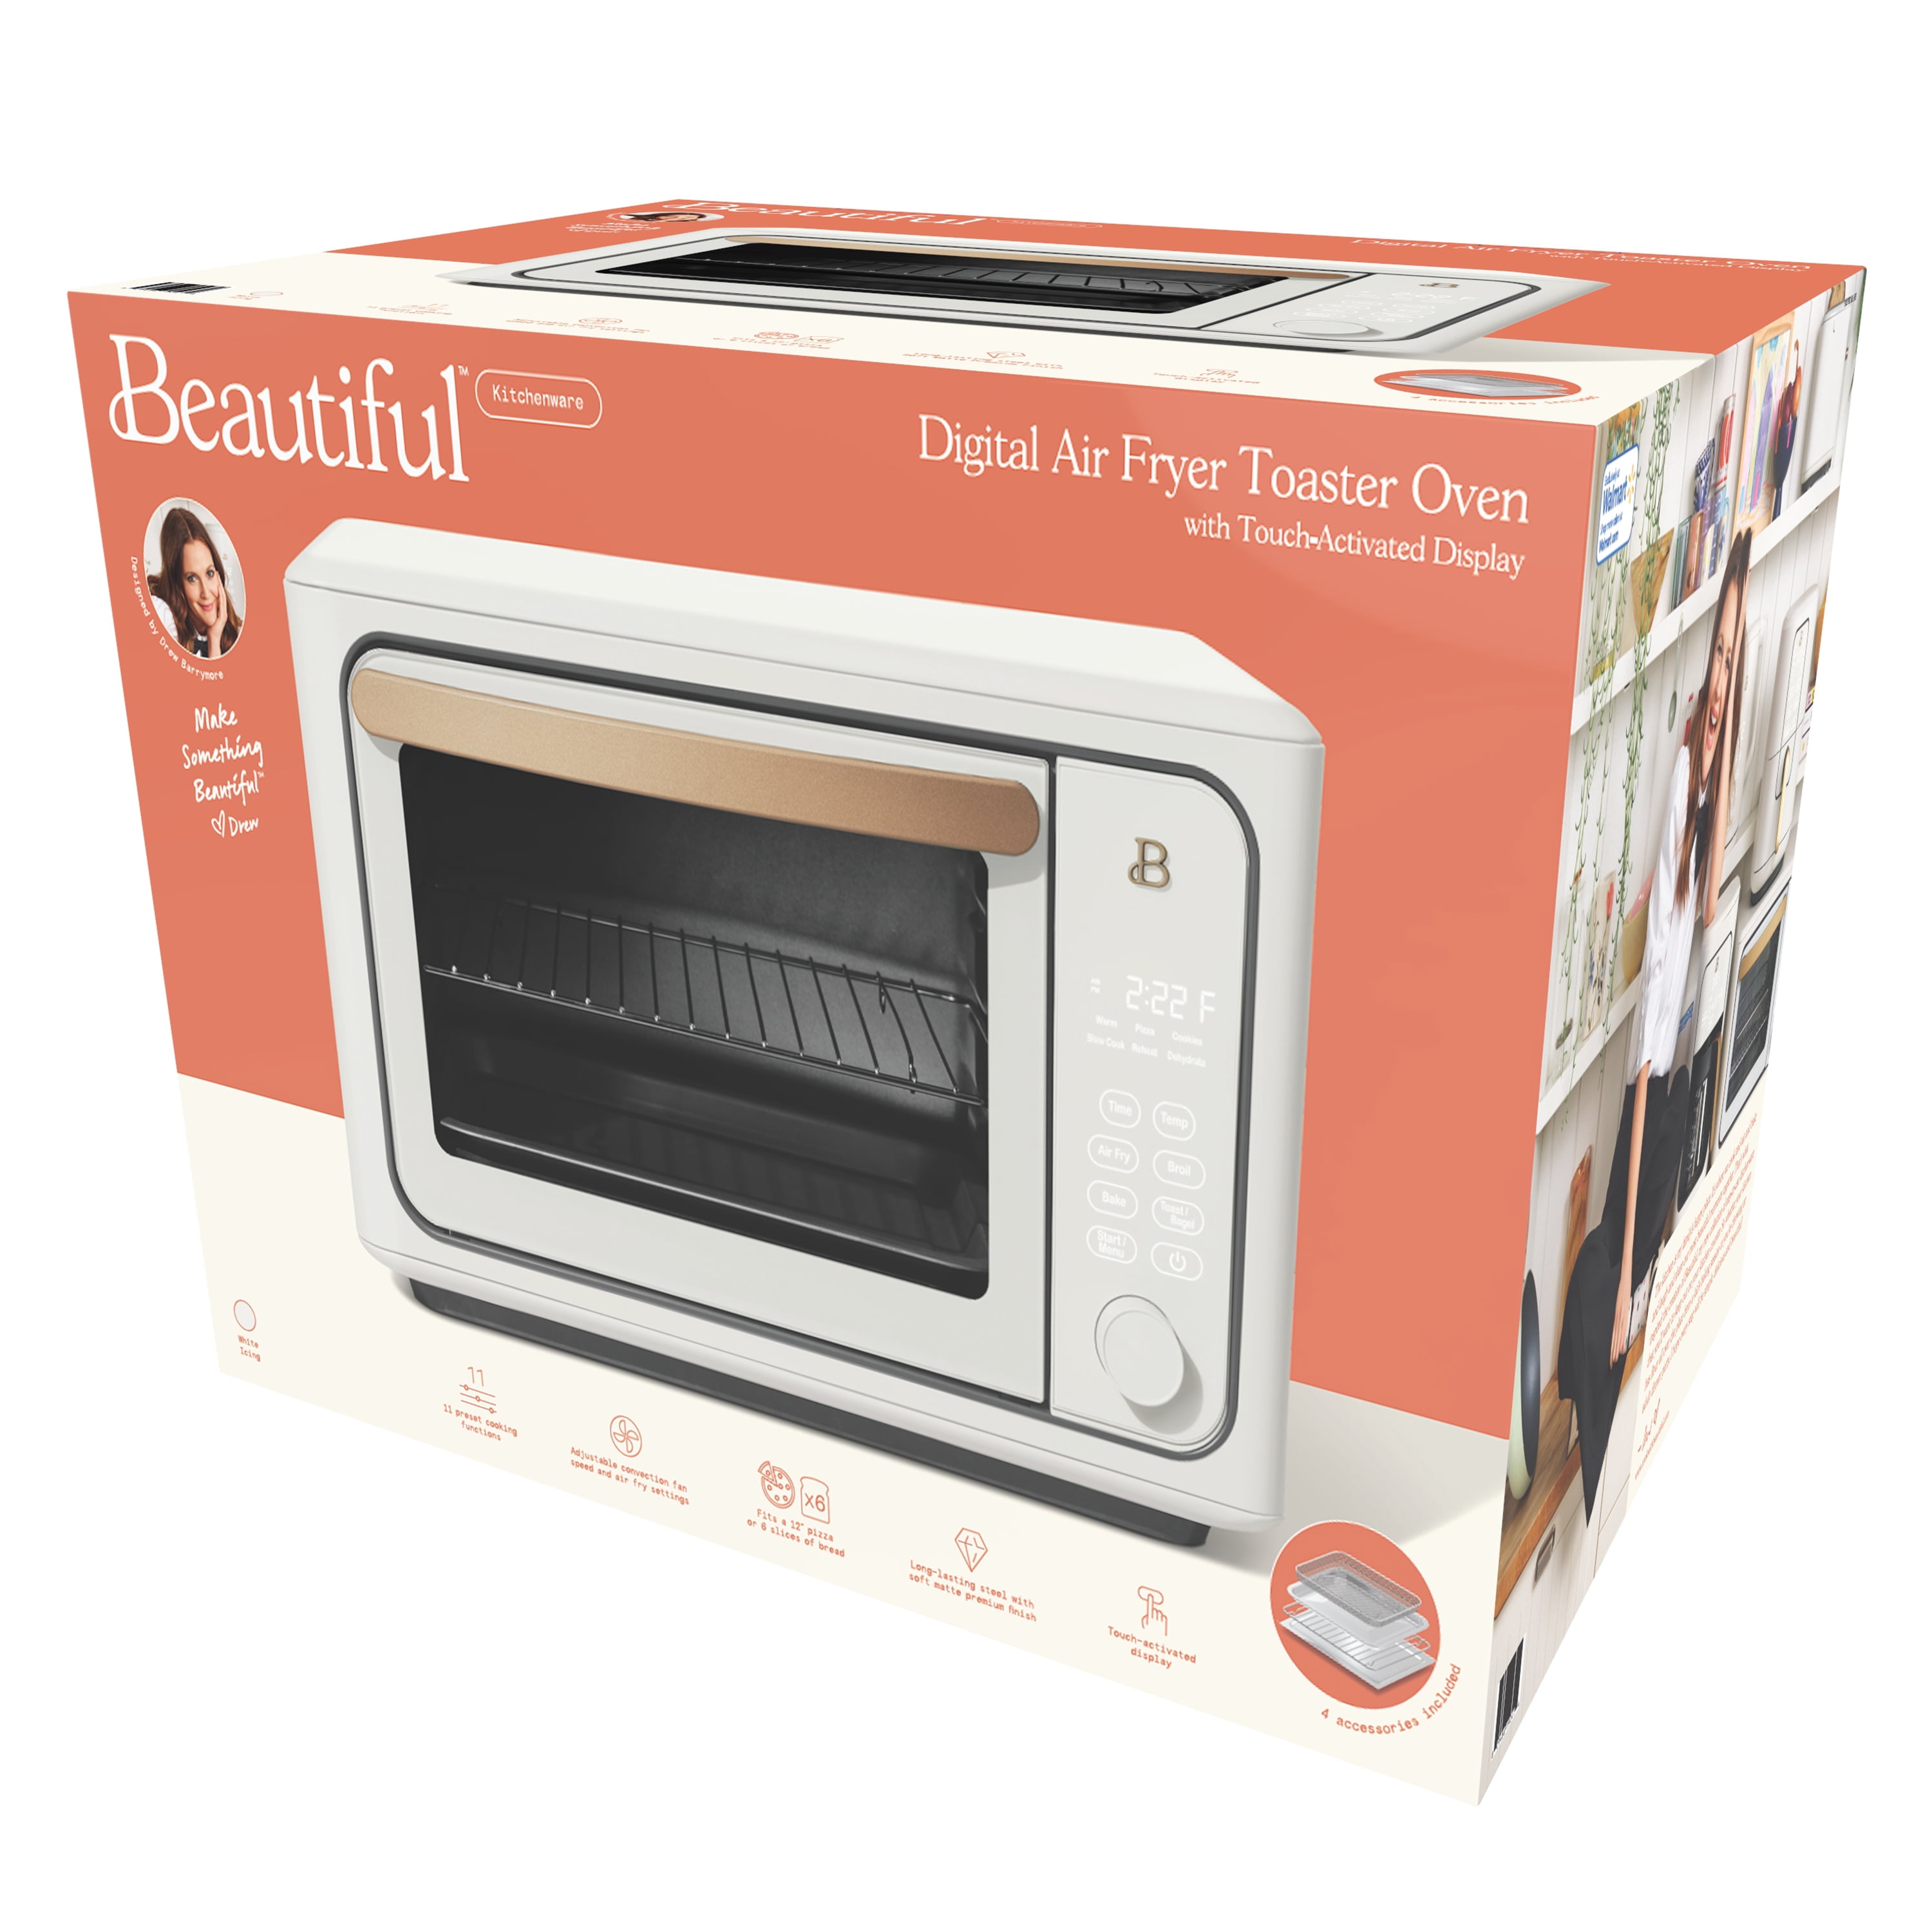 YONGSTYLE 6-Slice Toaster Oven Air Fryer-Air Fry, Grill, Dehydrate